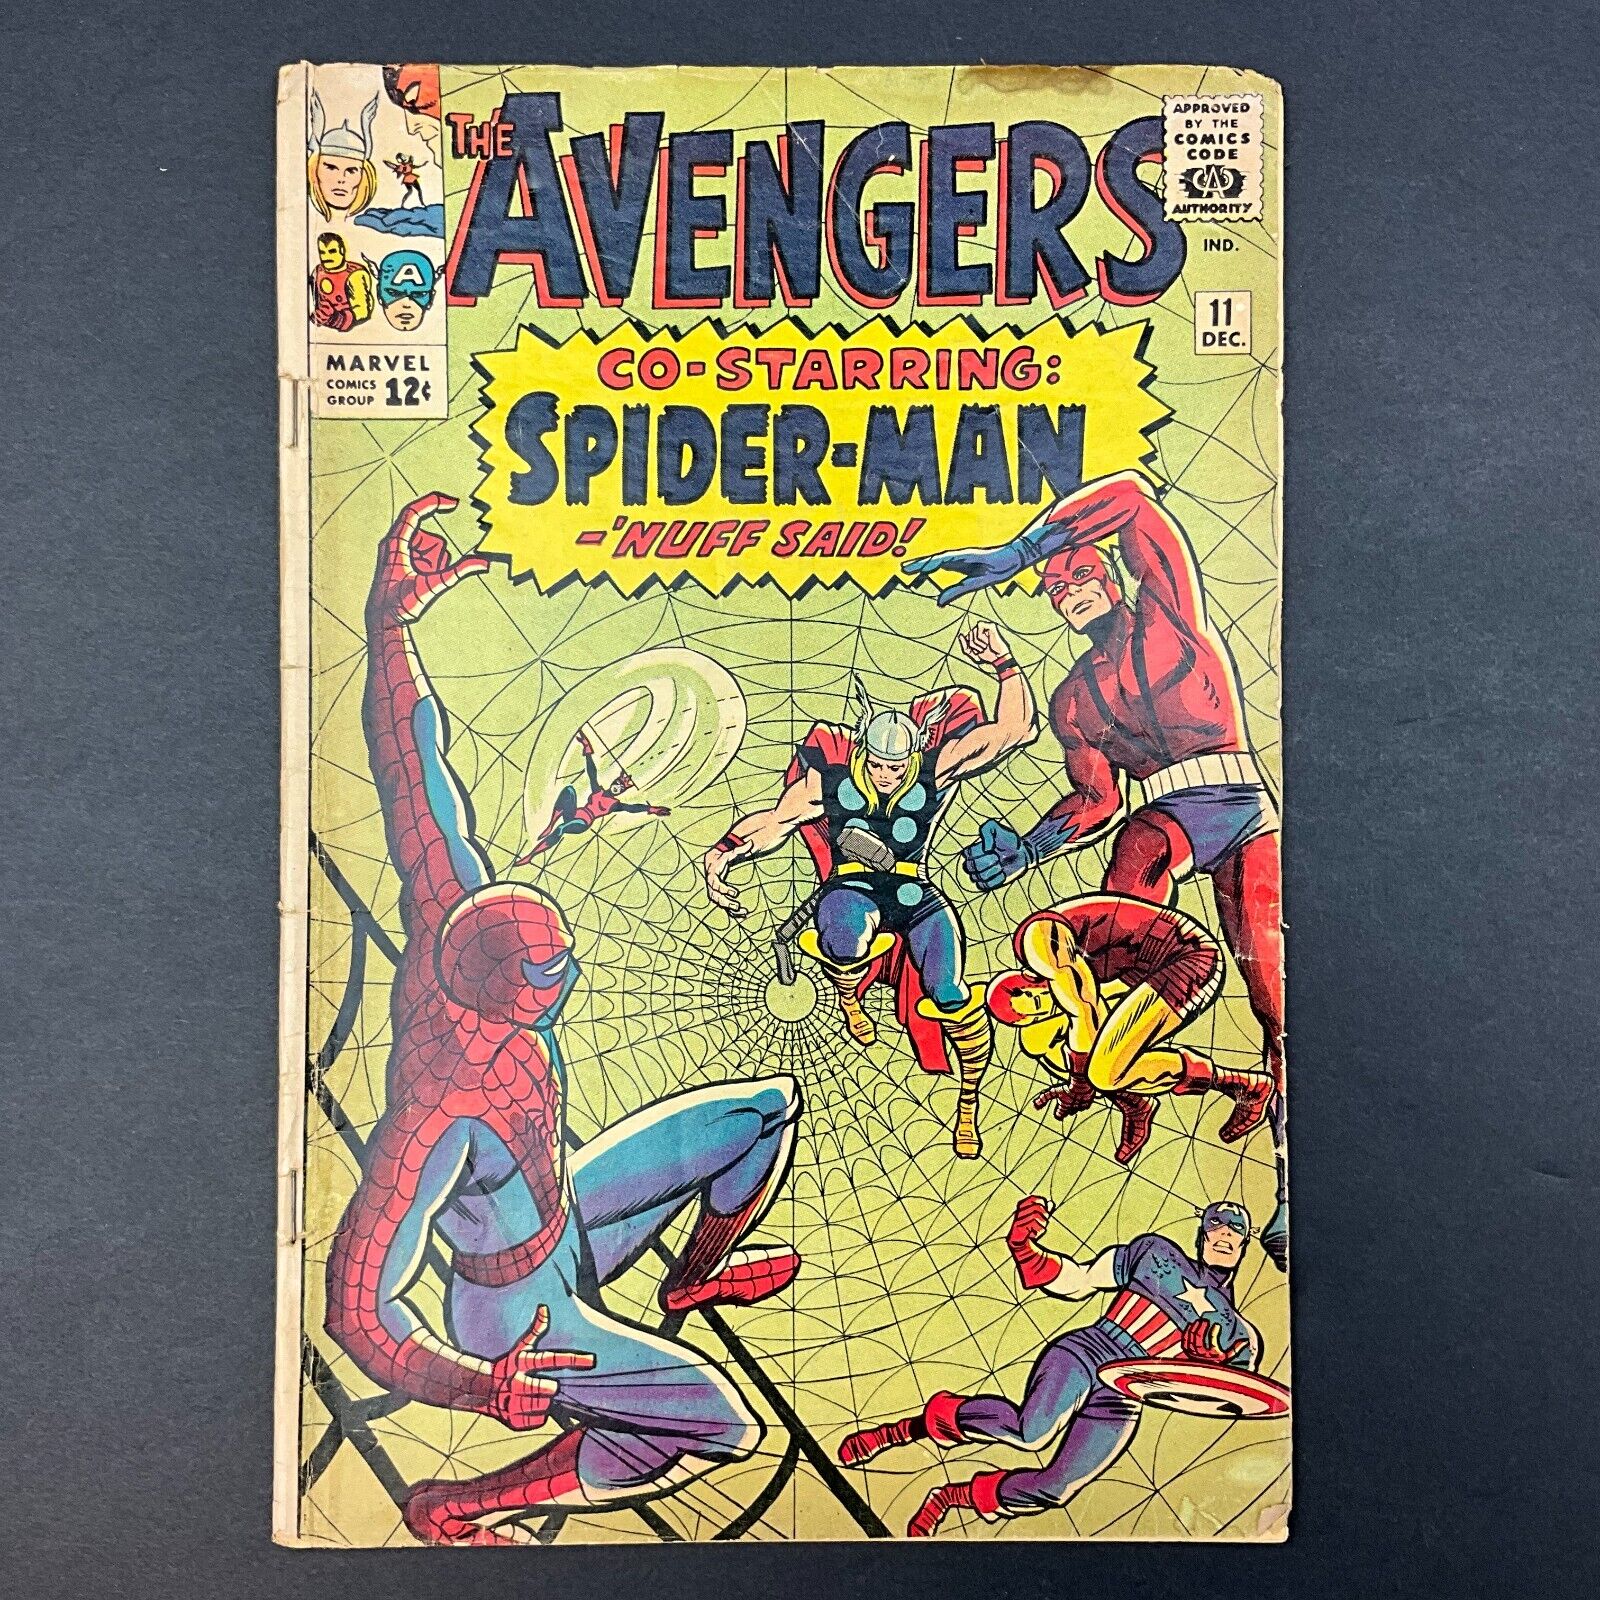 The Avengers #11,  First Meeting of Spider-Man and The Avengers, 2nd Kang, 1964